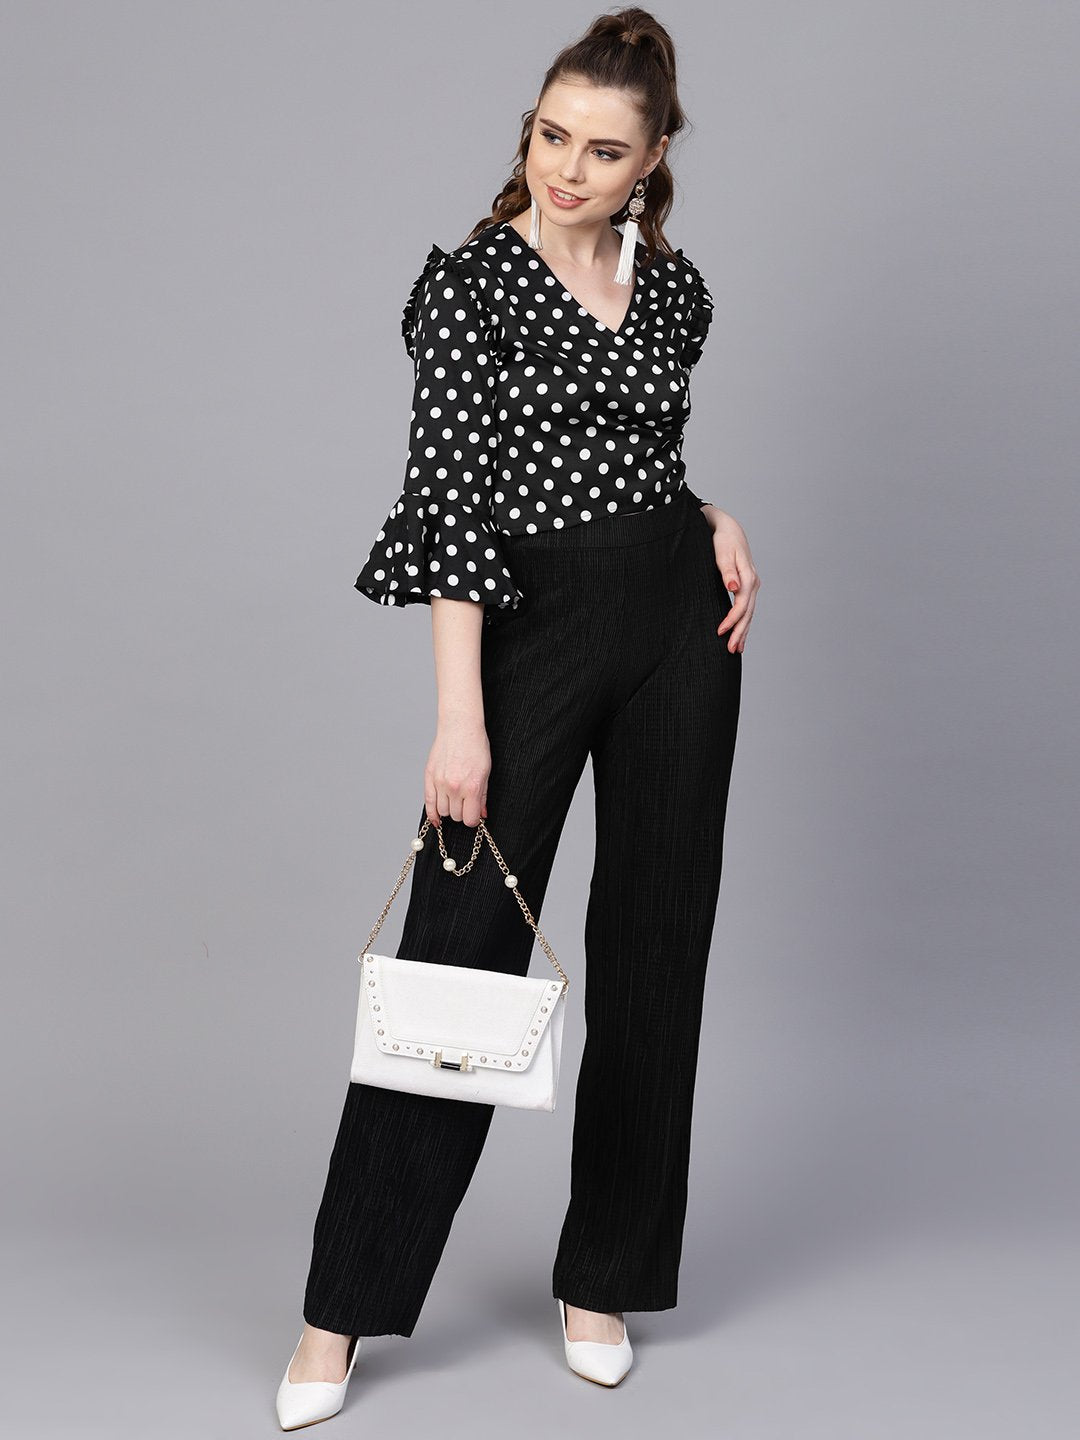 Women's Black Polka Dots Top With Detailed Sleeves & V-Neck - Nayo Clothing